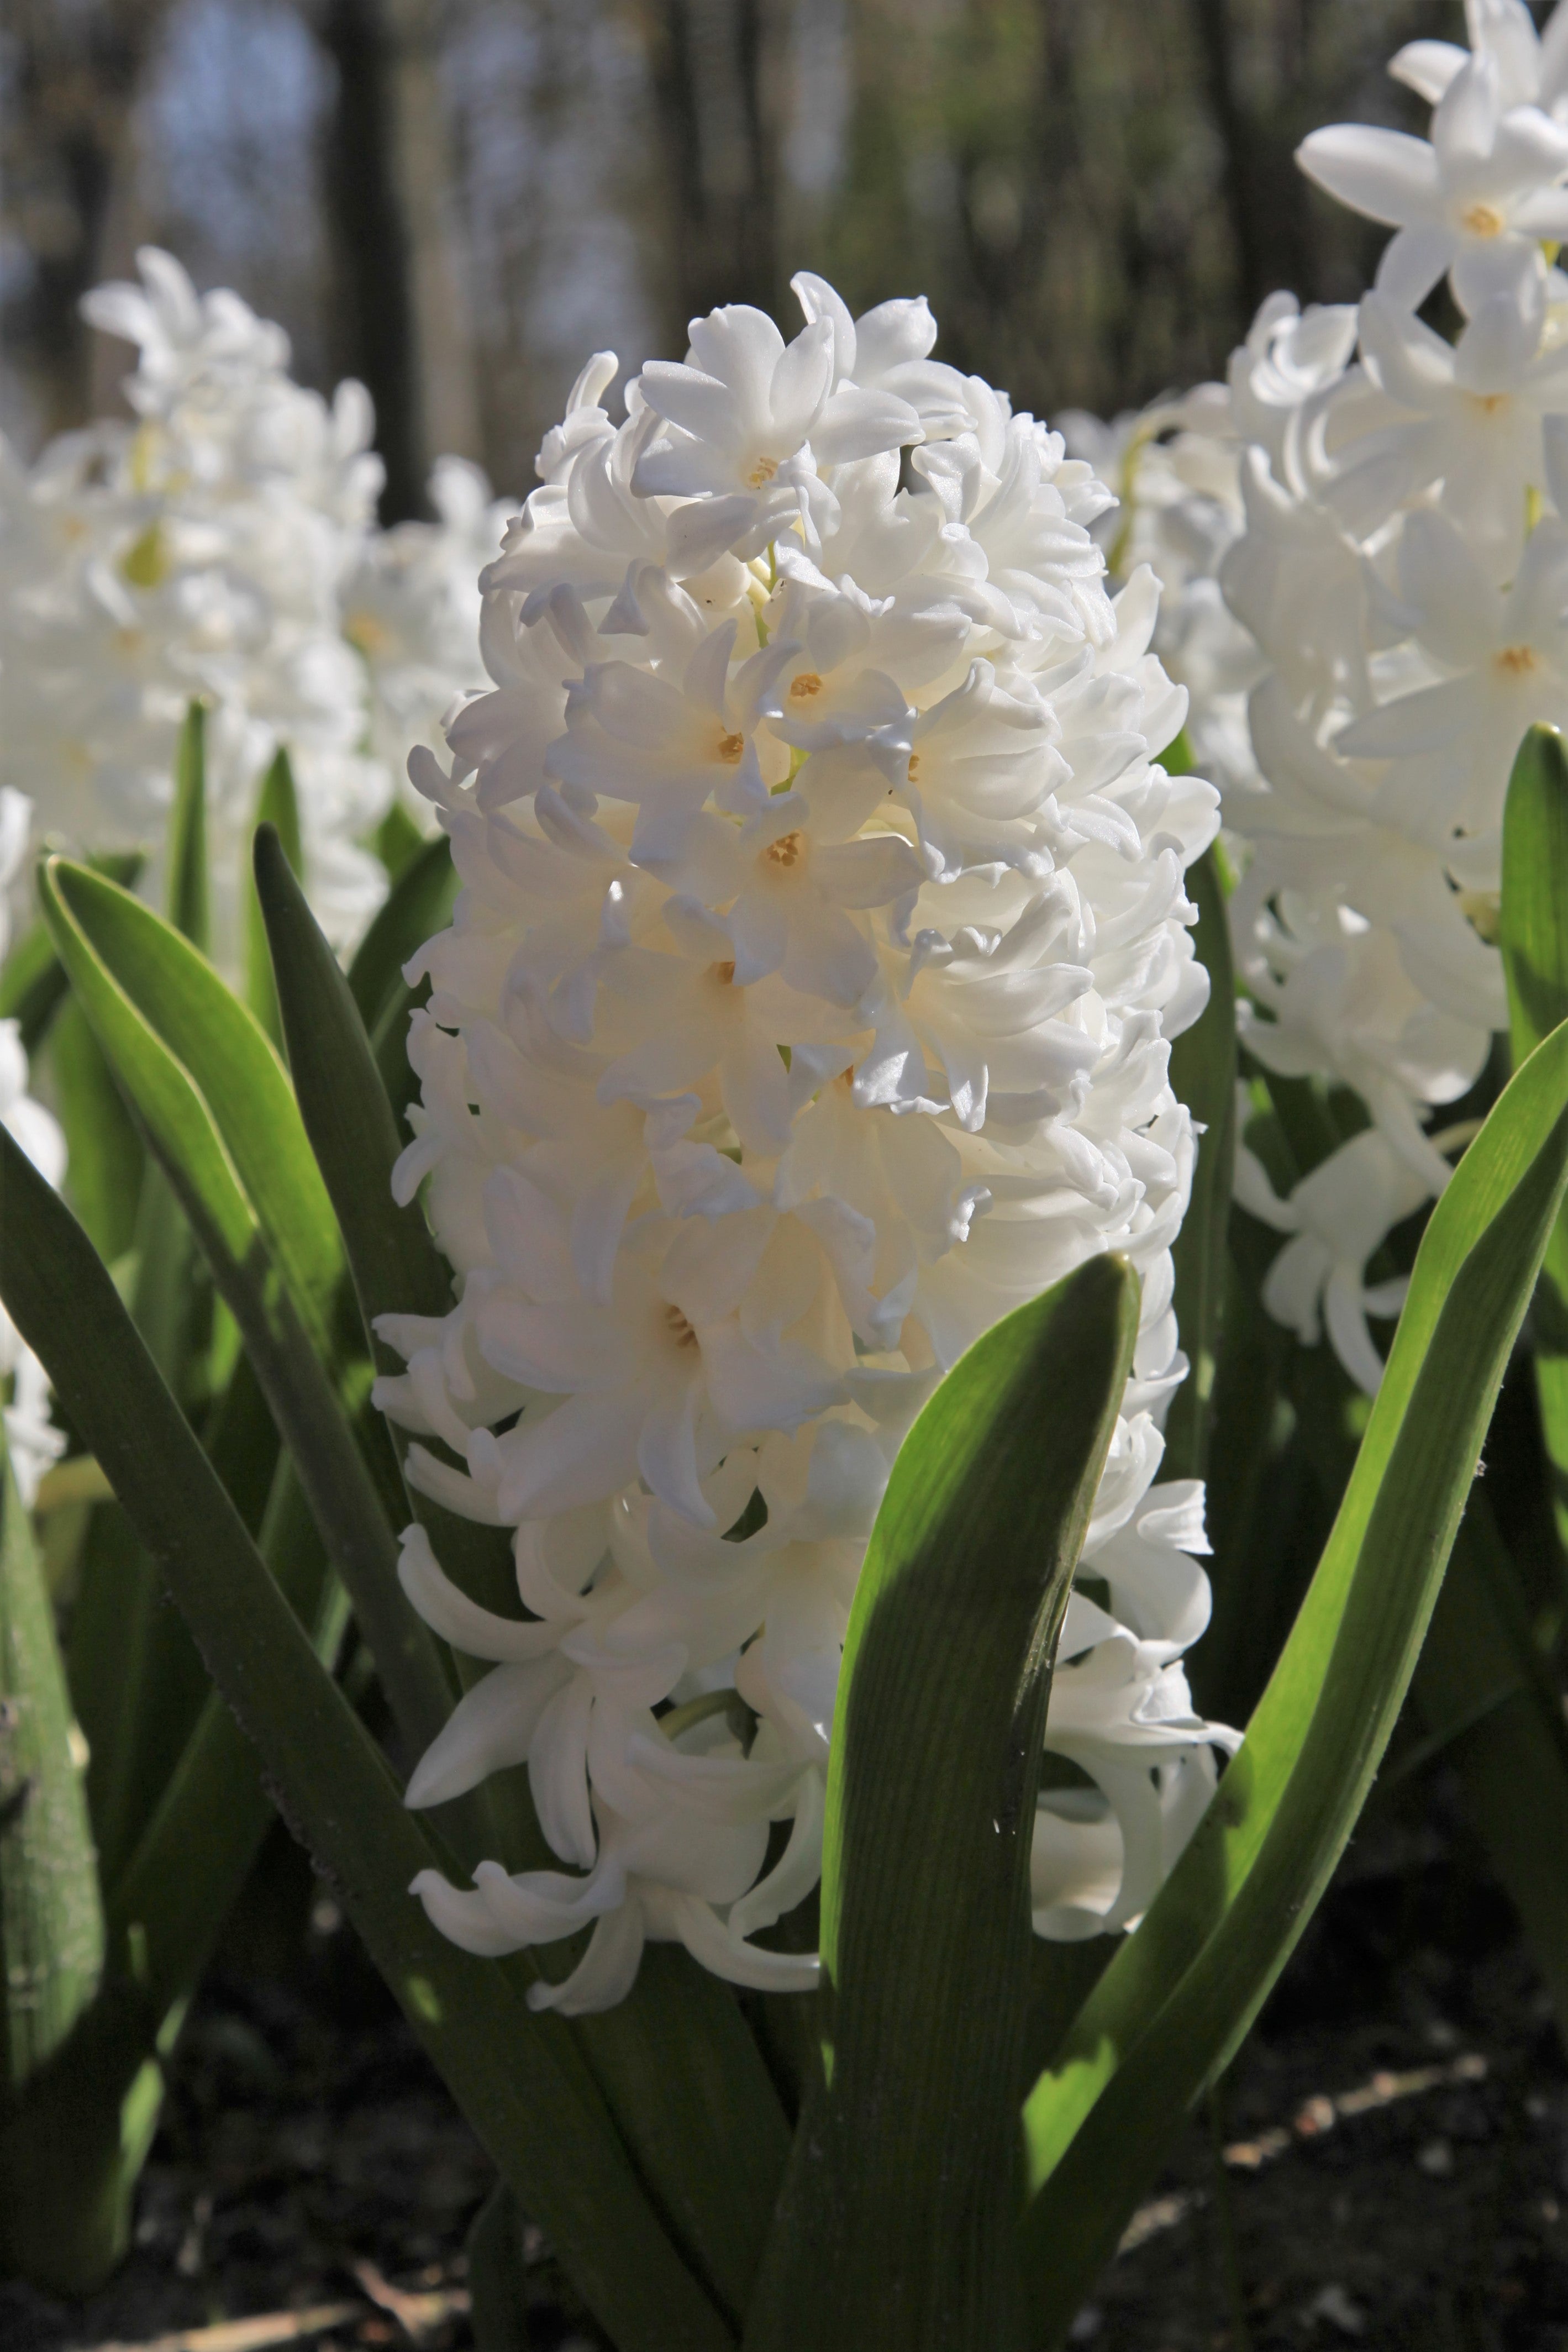 Hyacinth Carnegie with snowy white florets and green leaves in a group